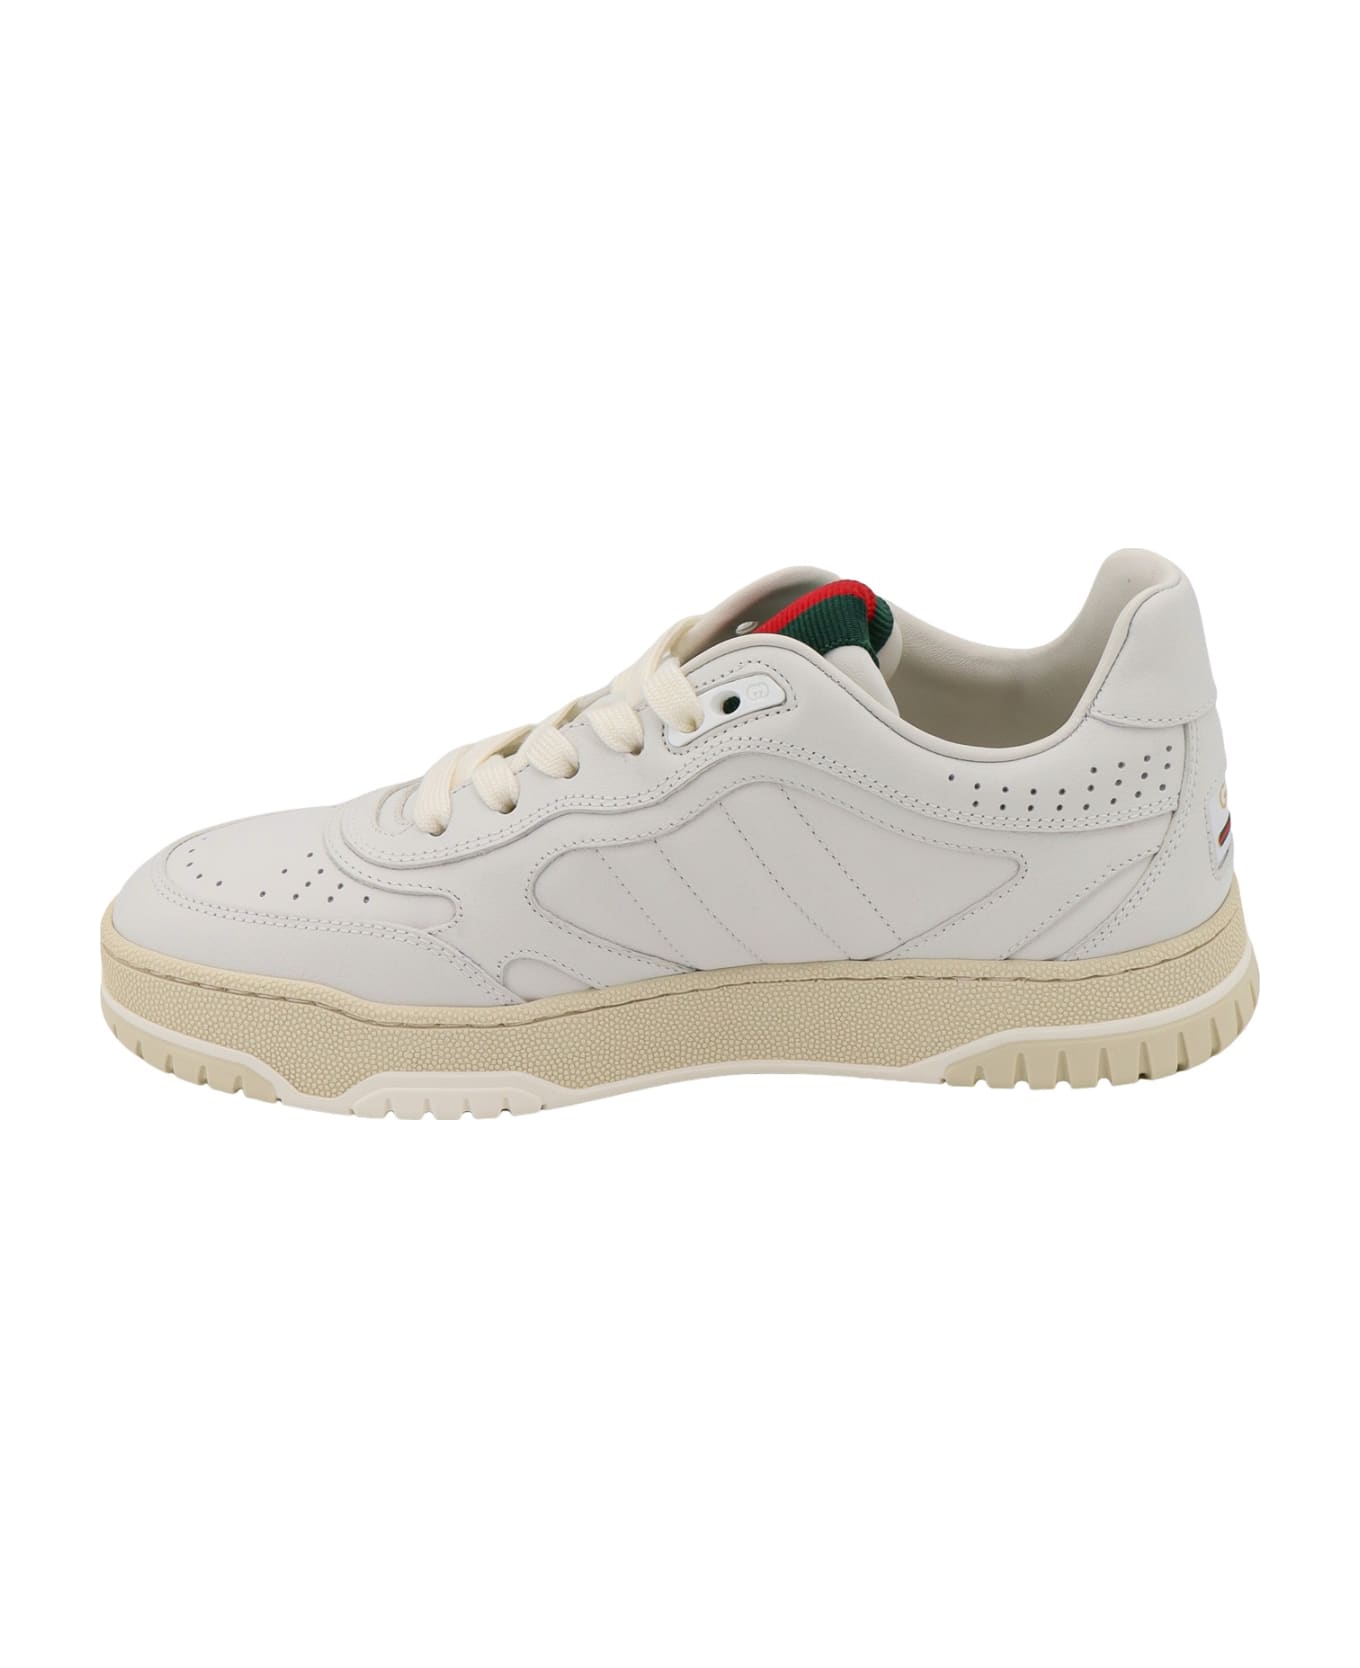 Gucci Re-web Sneakers - White スニーカー